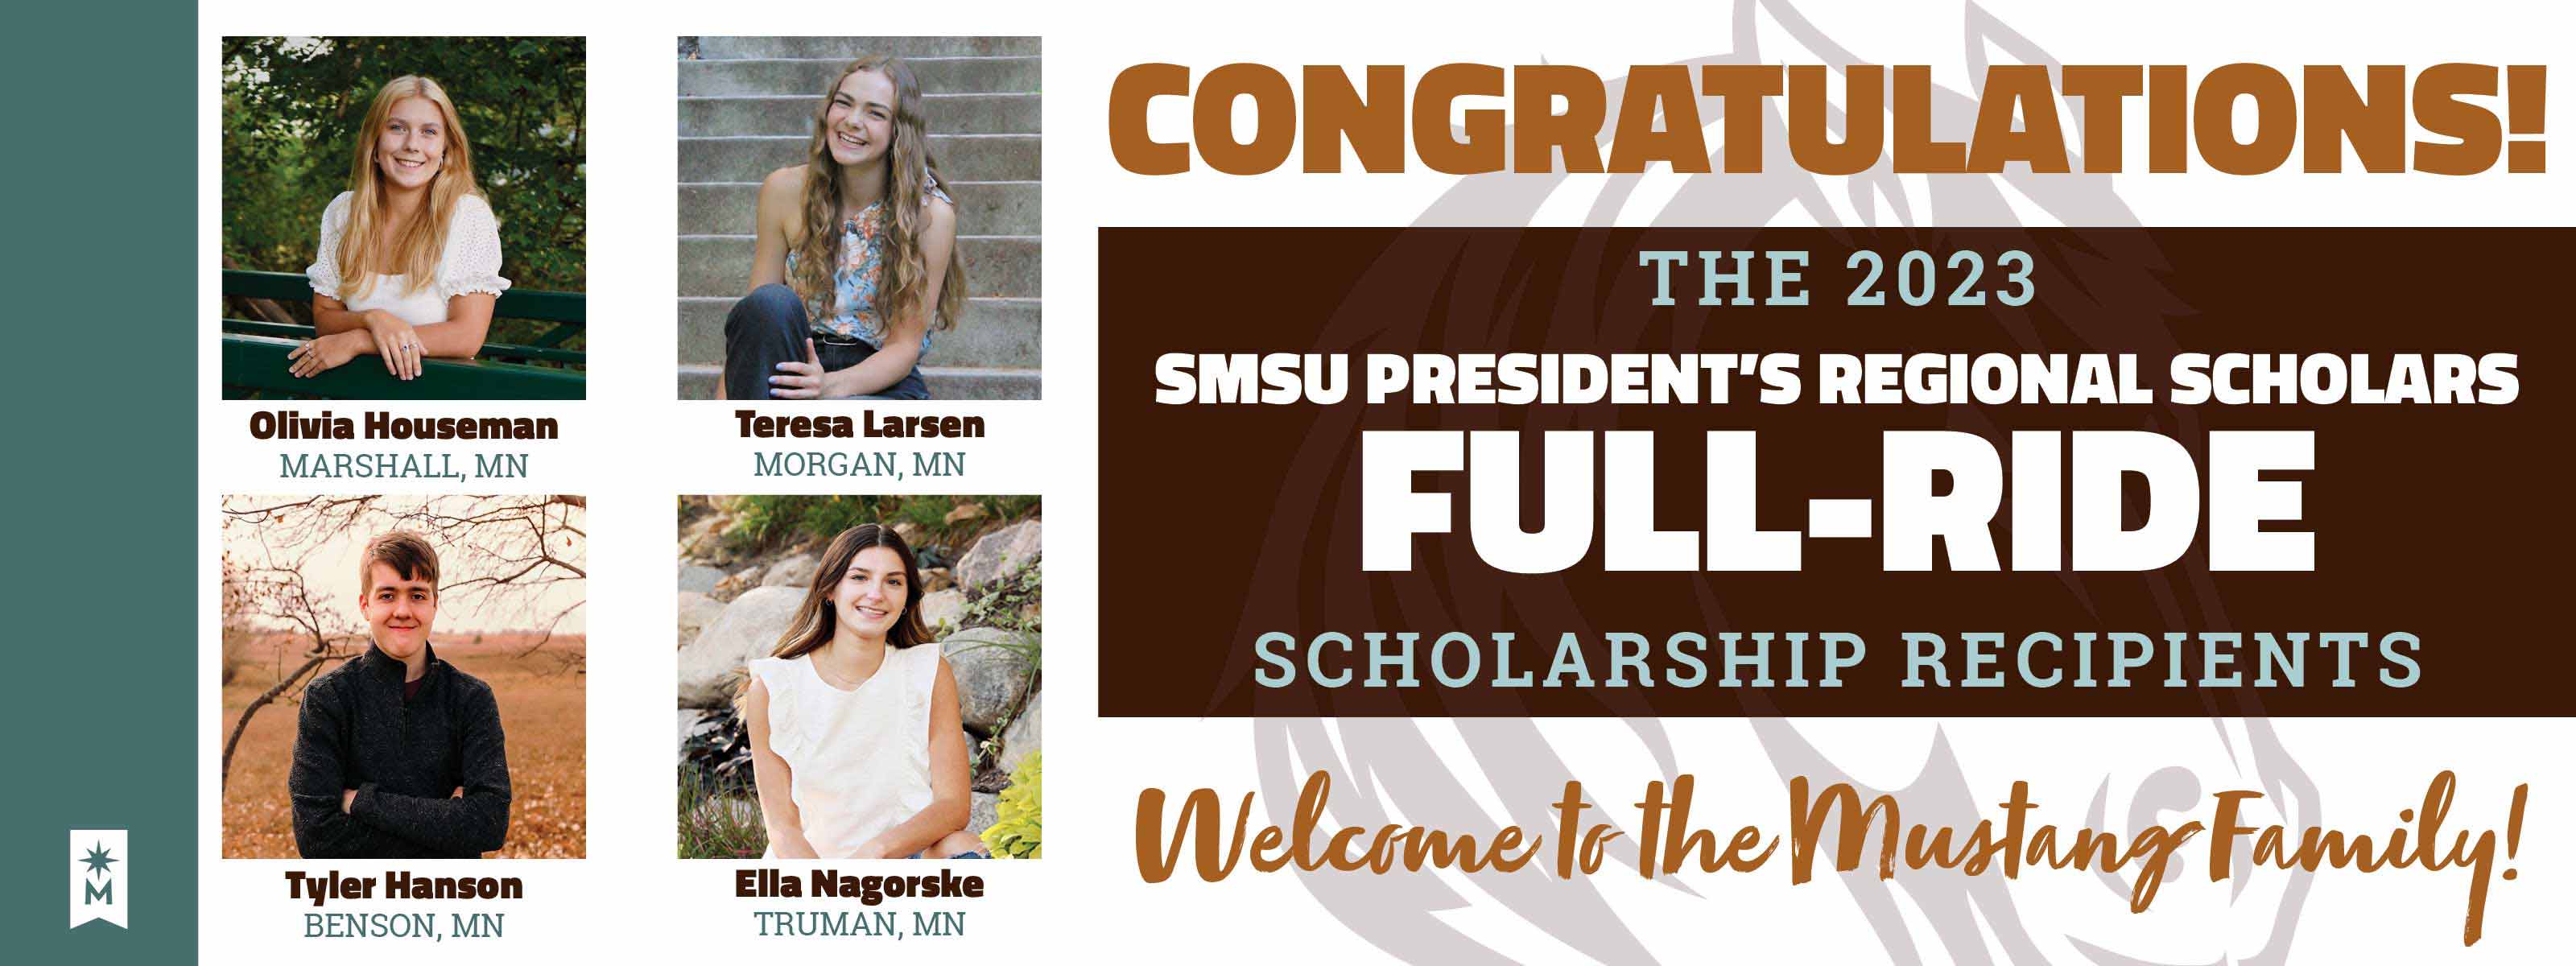 Congratulations! The 2023 SMSU President's Regional Scholars Full-Ride Scholarship Recipients - Welcome to the Mustang Family! - Click to read the article